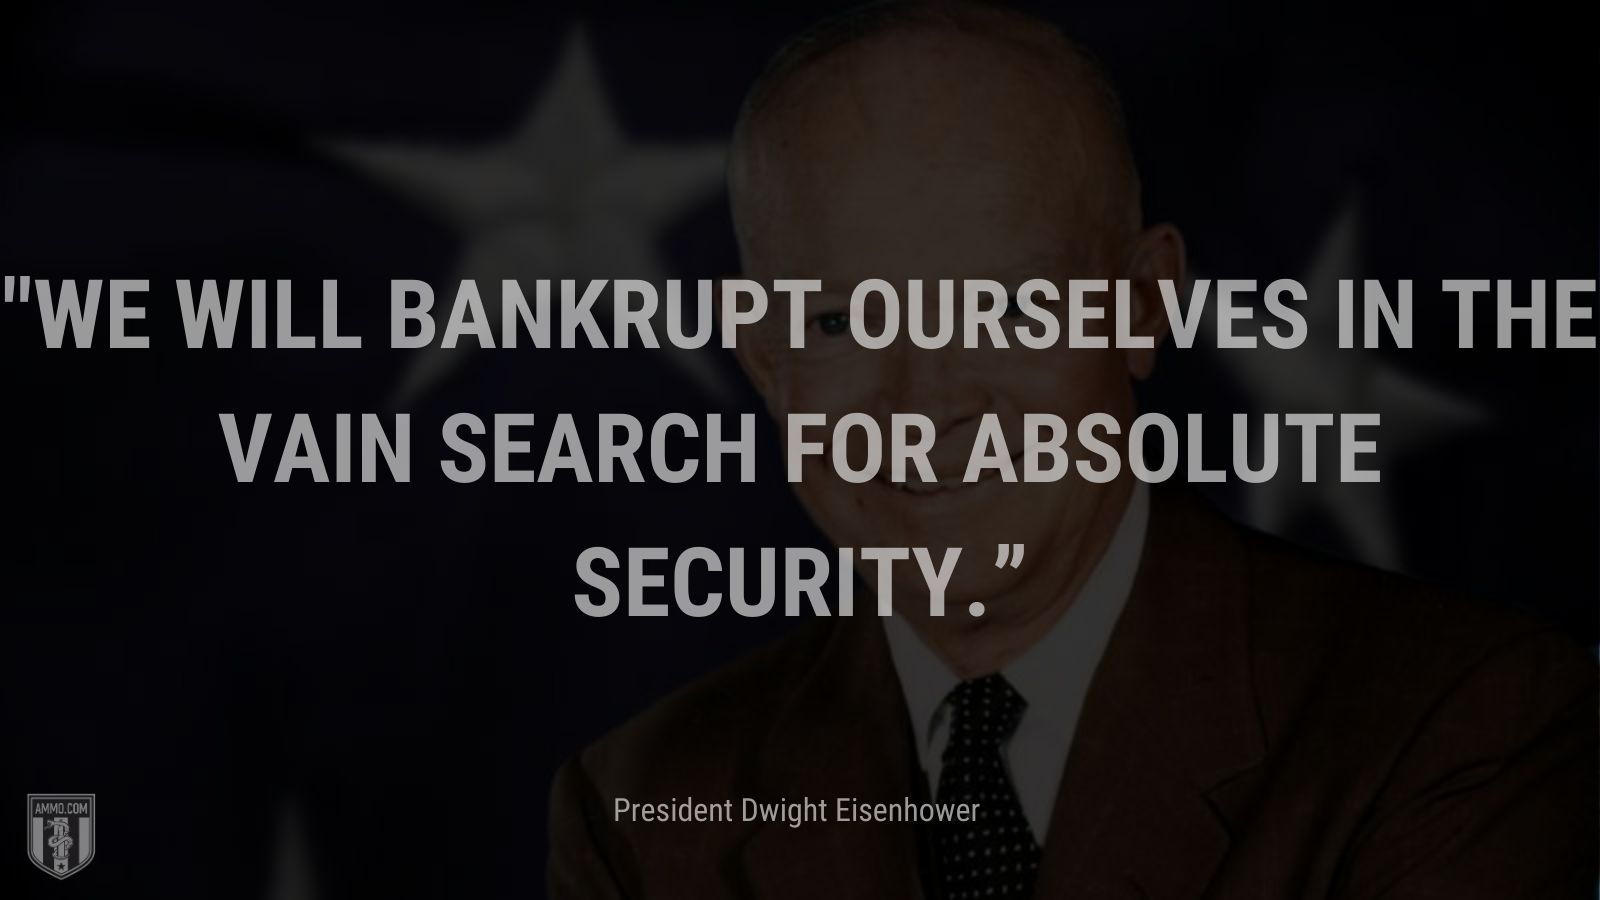 “We will bankrupt ourselves in the vain search for absolute security.” - President Dwight Eisenhower